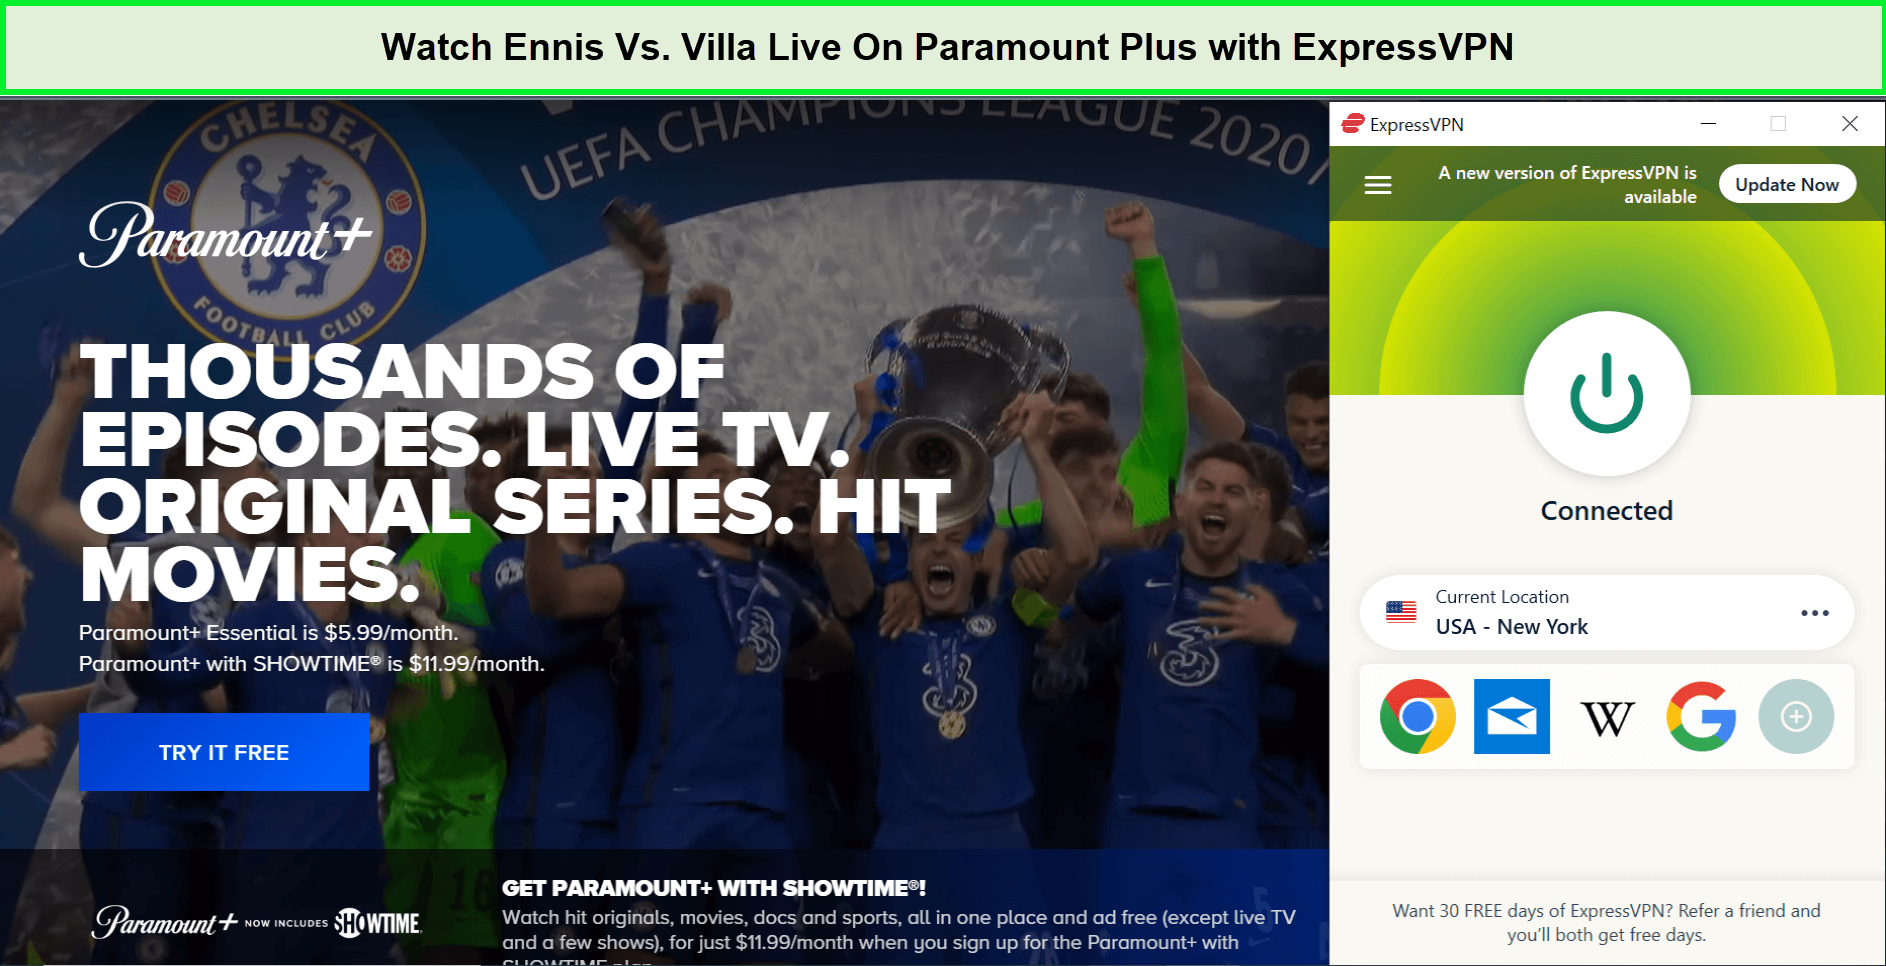 Watch-Ennis-Vs.-Villa-Live-in-Hong Kong-On-Paramount-Plus-with-ExpressVPN